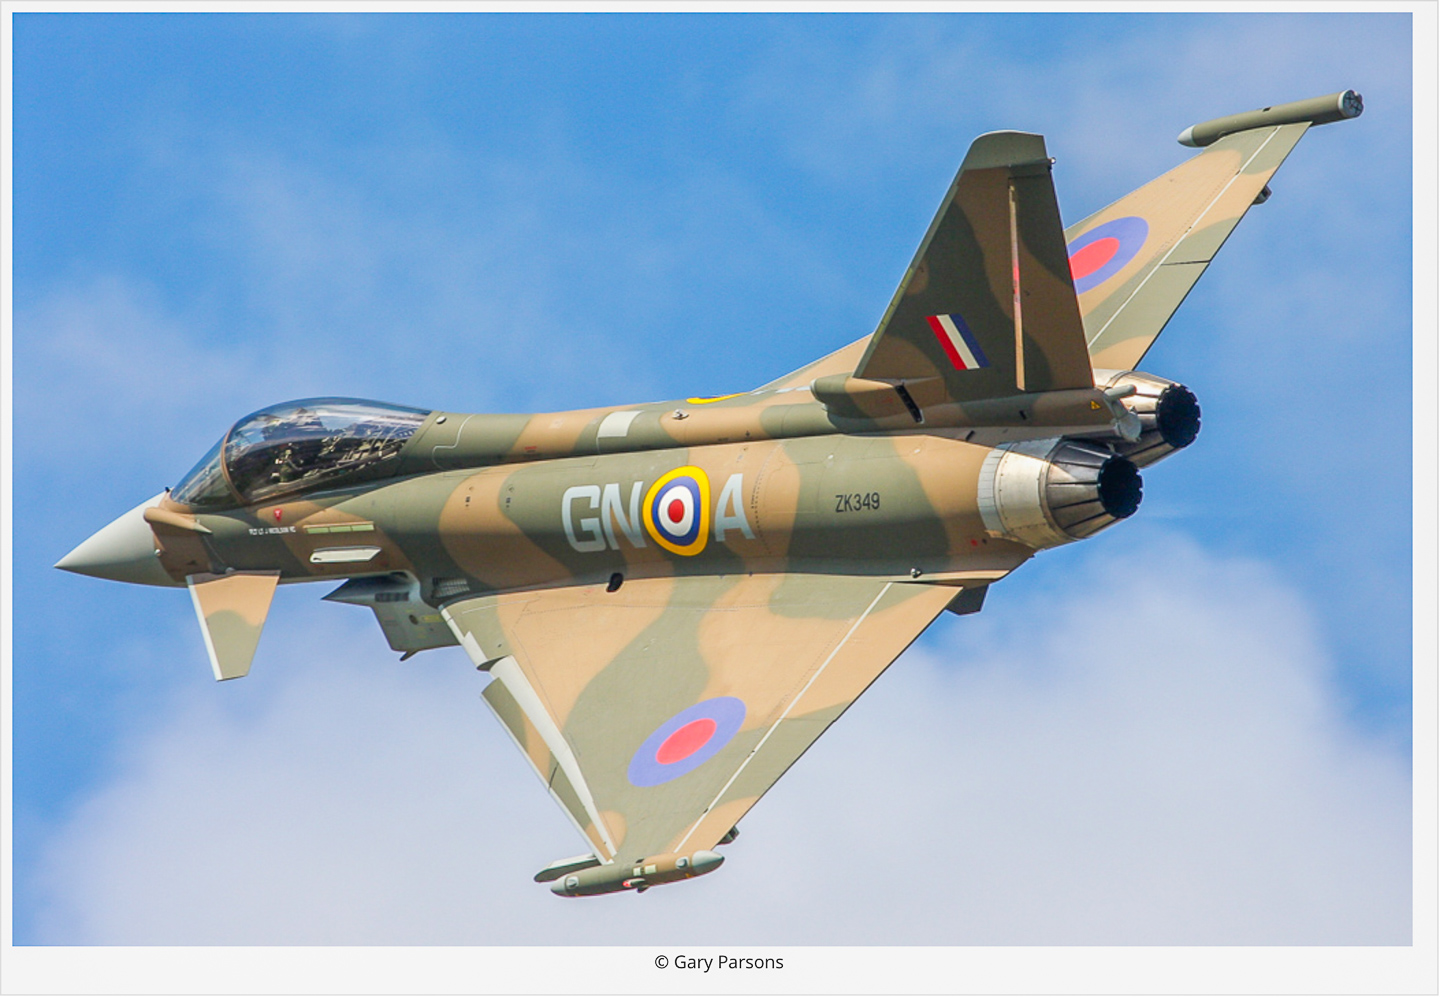 The 29(R) Squadron Typhoon II painted to represent James Nicolson’s Hawker Hurricane from his Victoria Cross-winning combat during the Battle of Britain. (photo by Gary Parsons via Global Aviation Resource)